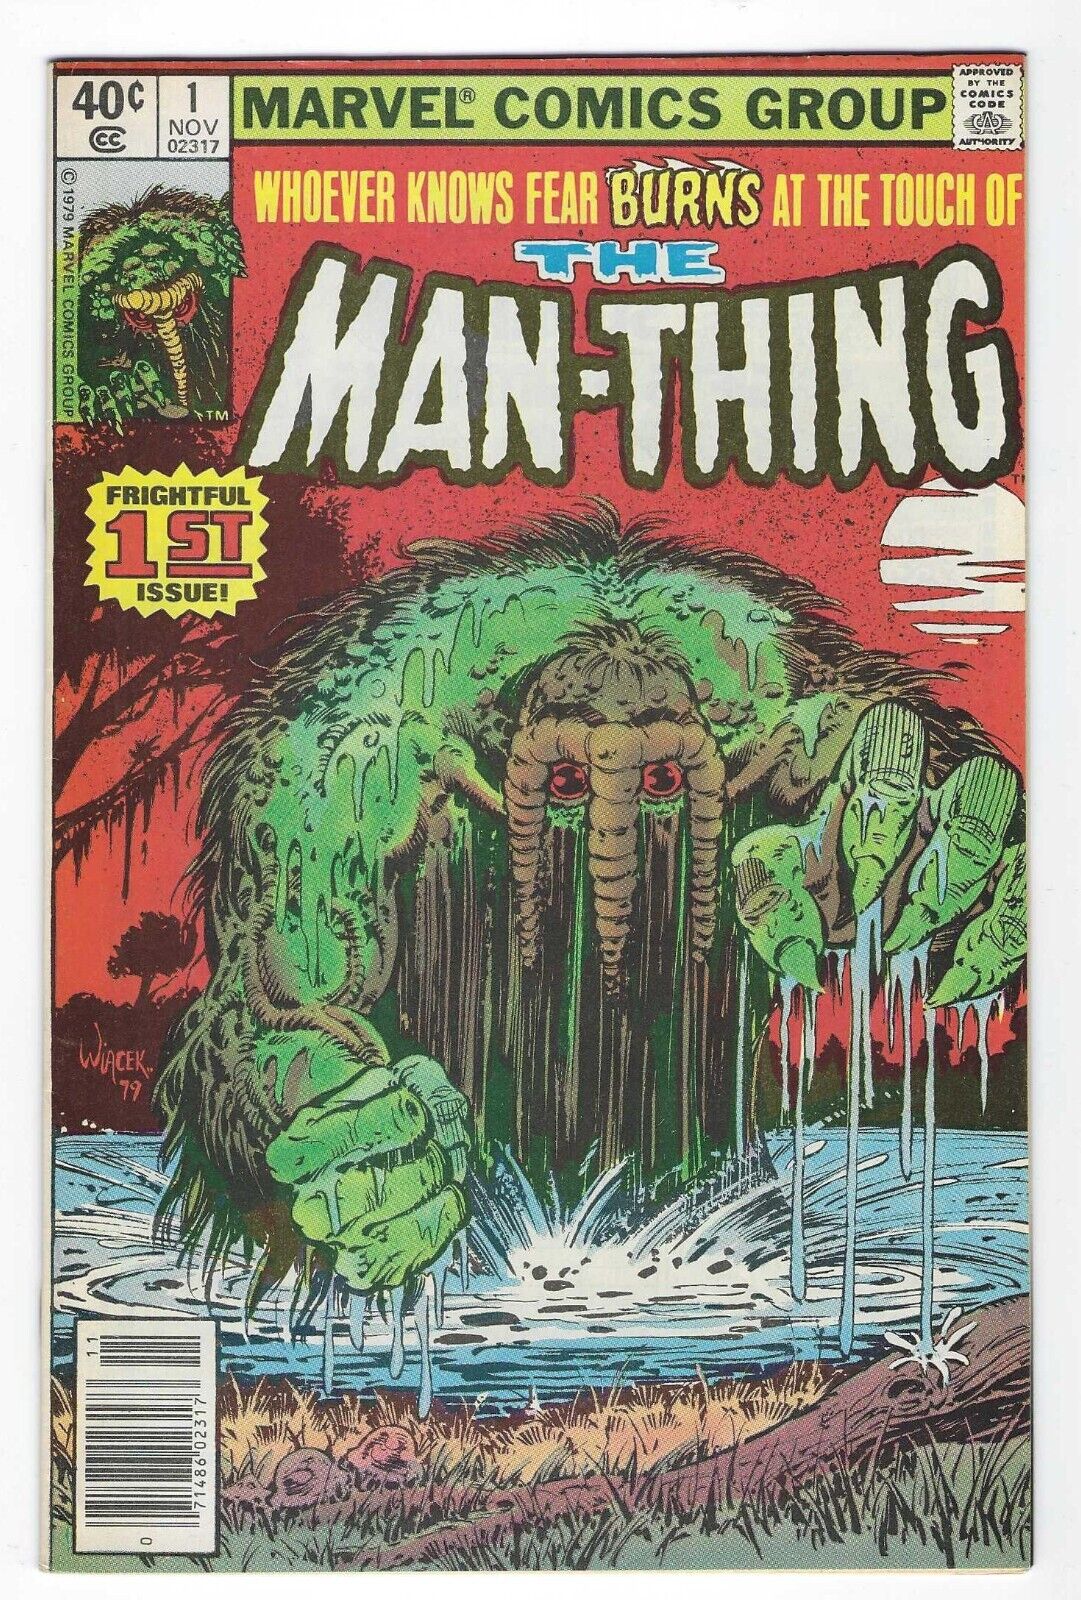 Man-Thing #1 1979 - Newsstand Edition in Excellent Shape Fine